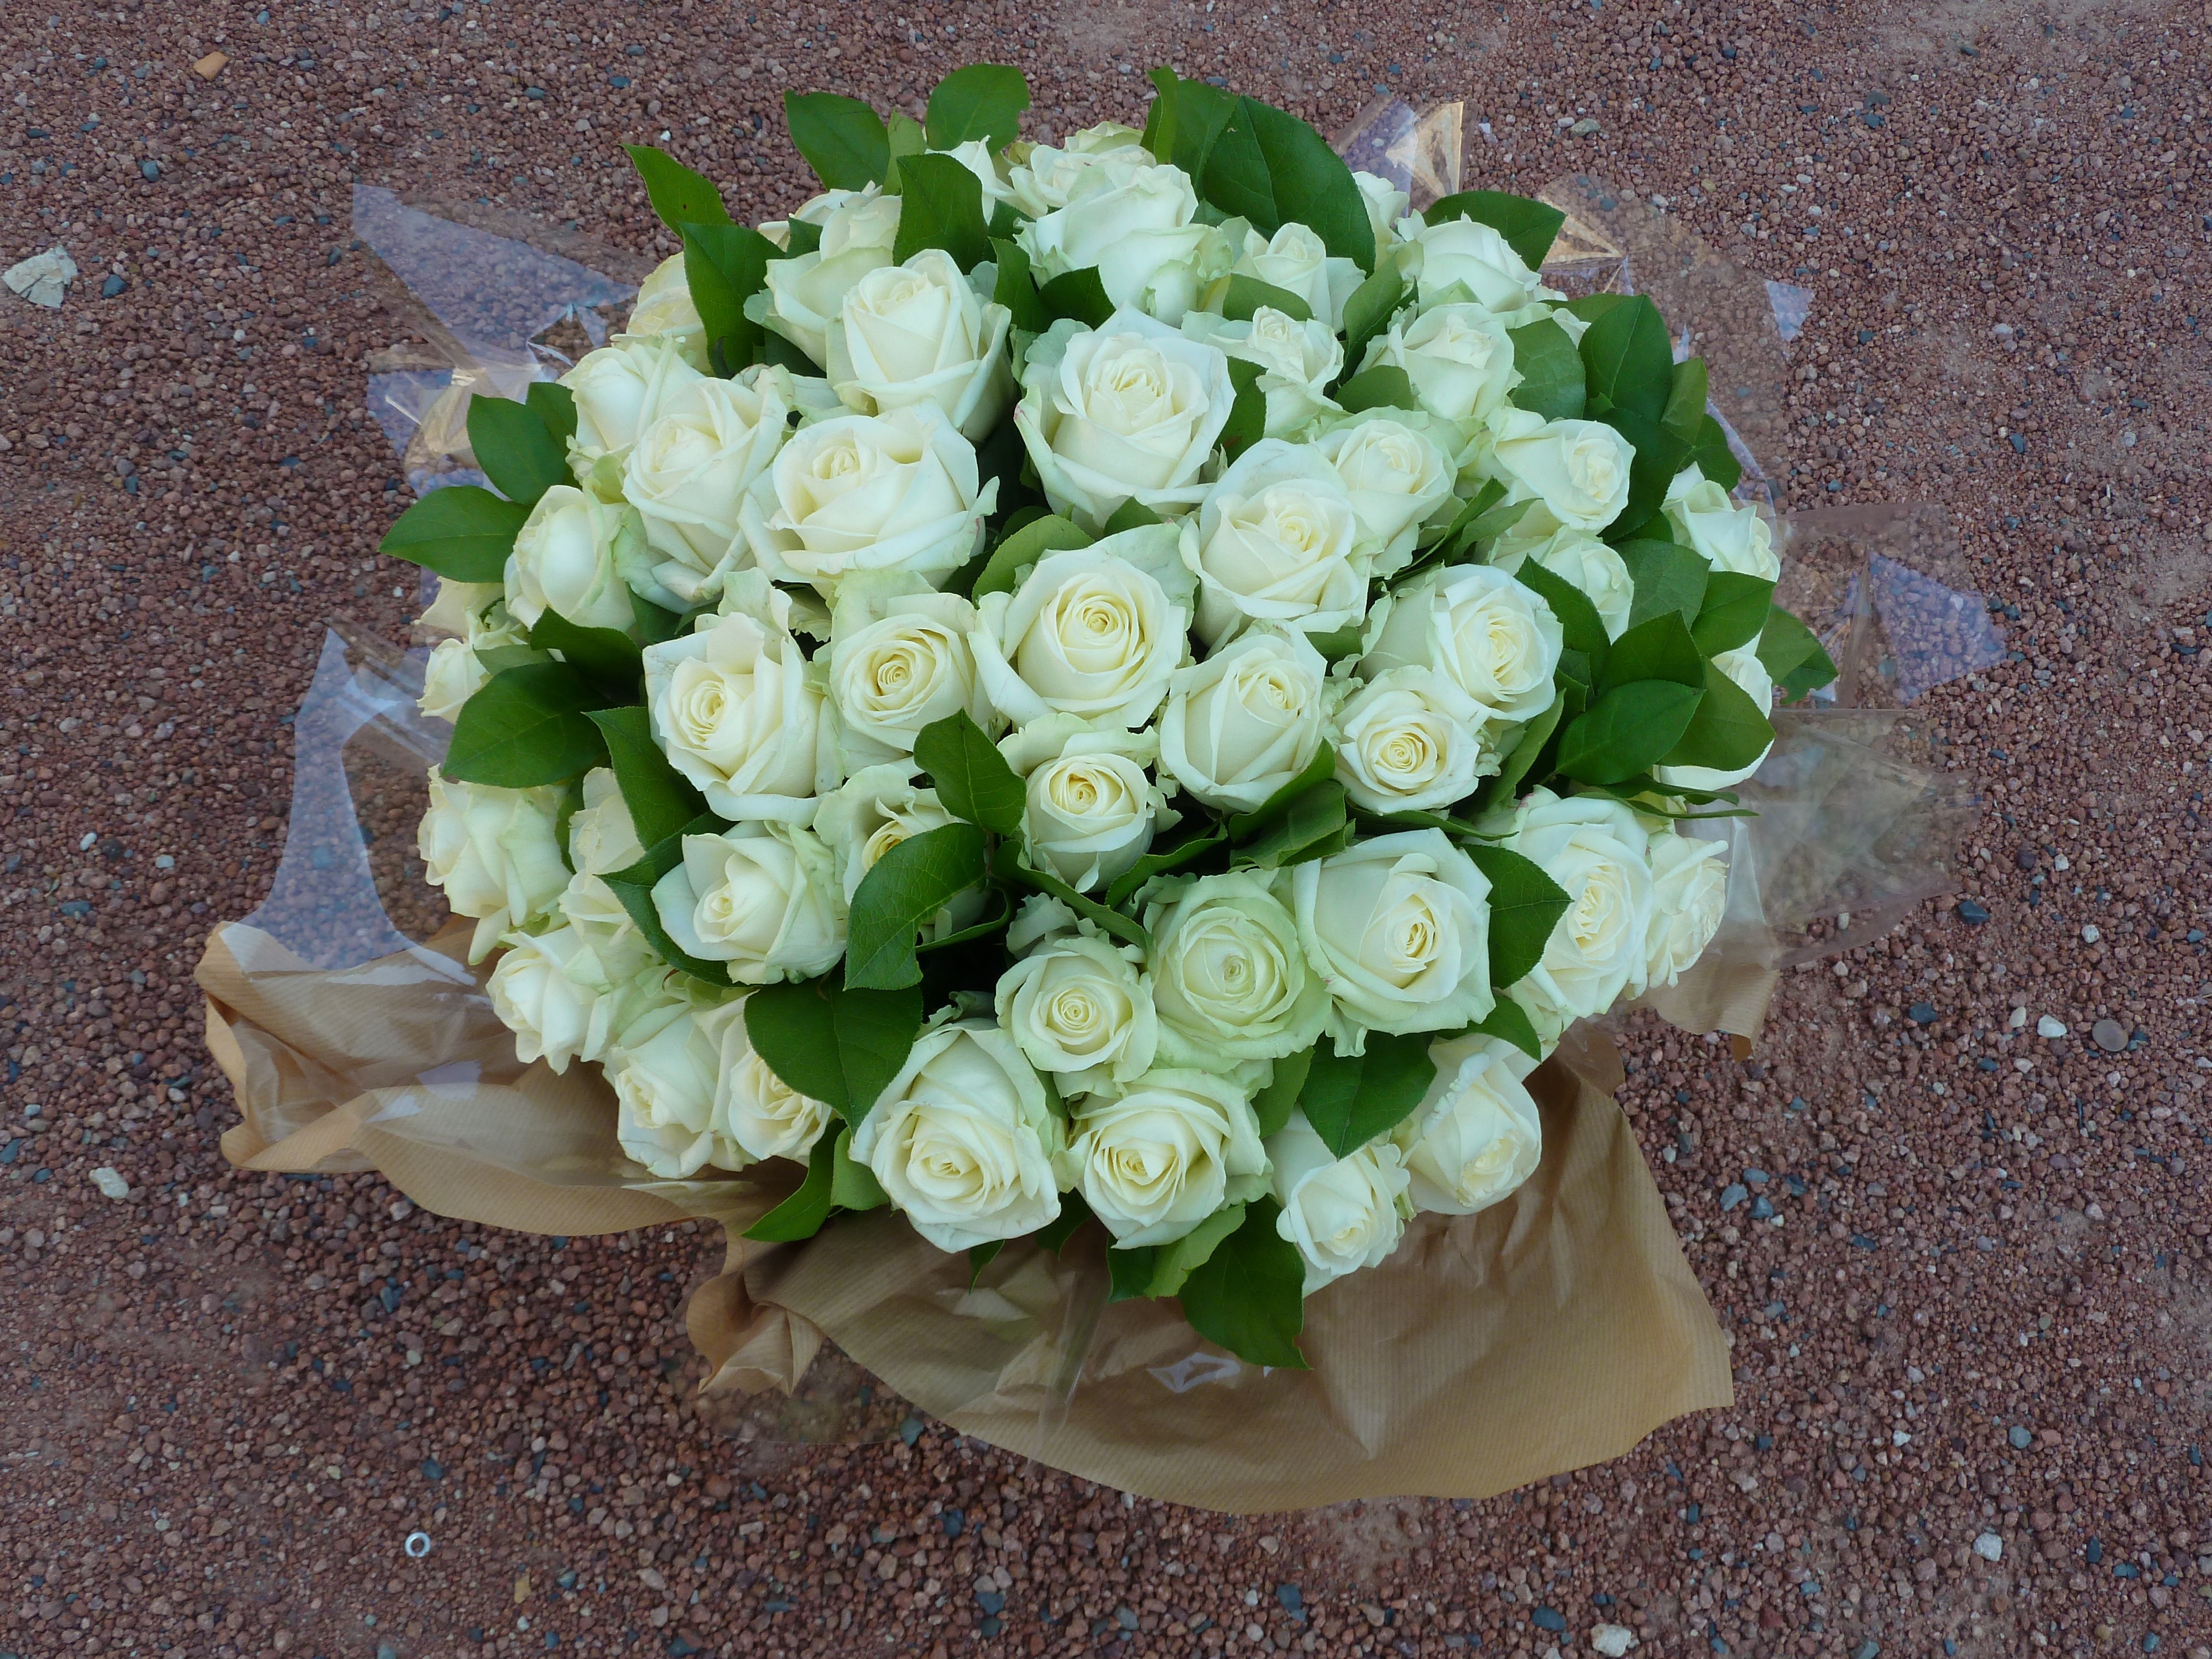 GERBE ROSES BLANCHES, COURONNE DE ROSES BLANCHES, BOUQUET DE ROSES BLANCHES.  - Florafrance